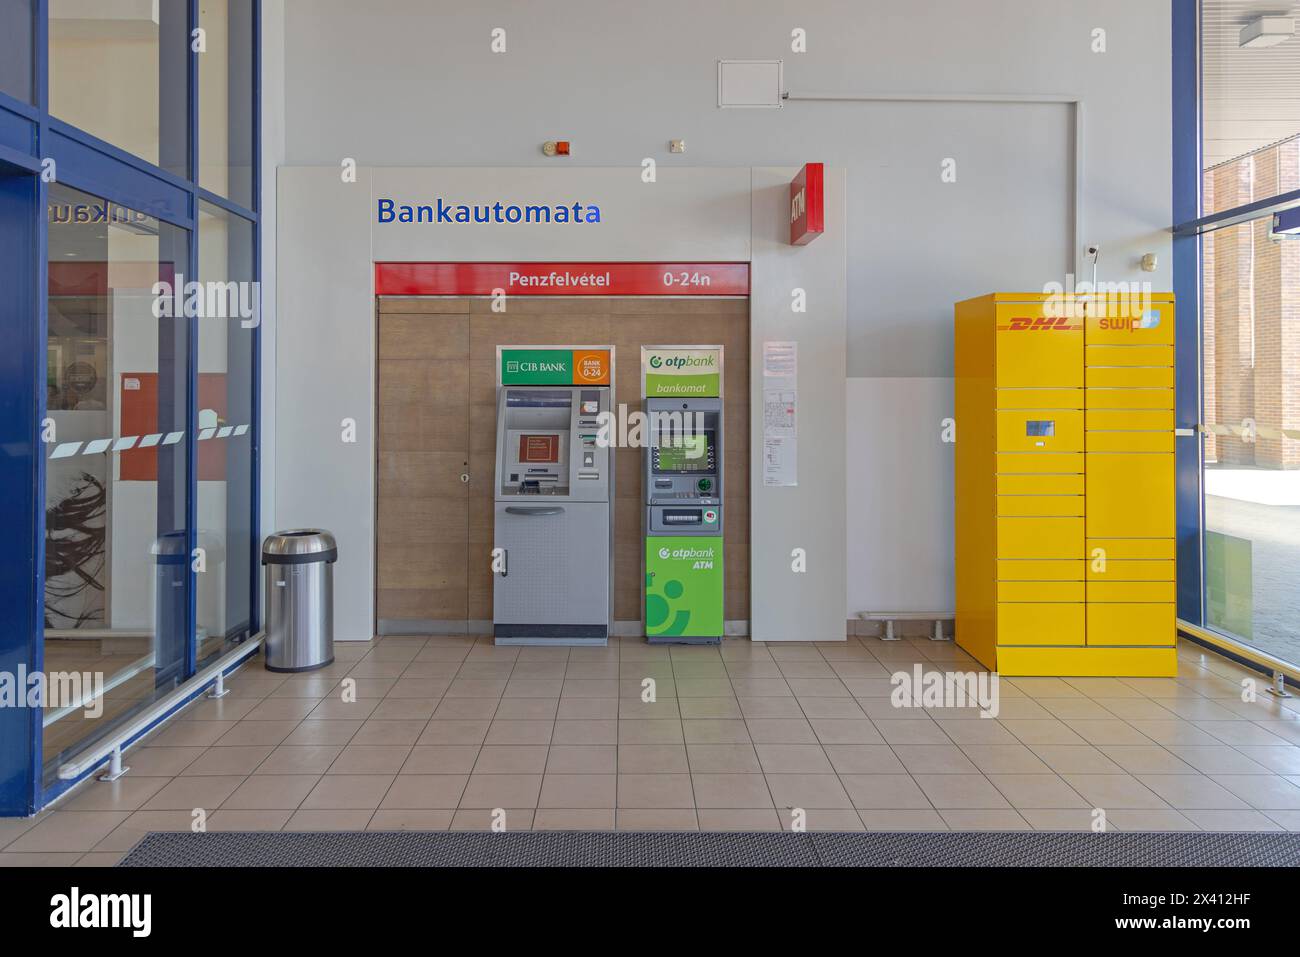 Szeged, Hungary - August 01, 2022: Atm Cib Bank Otp Bankomat and Yellow DHL Locker Swip Box in Tesco Supermarket and Shopping Mall Located in Sunshine Stock Photo